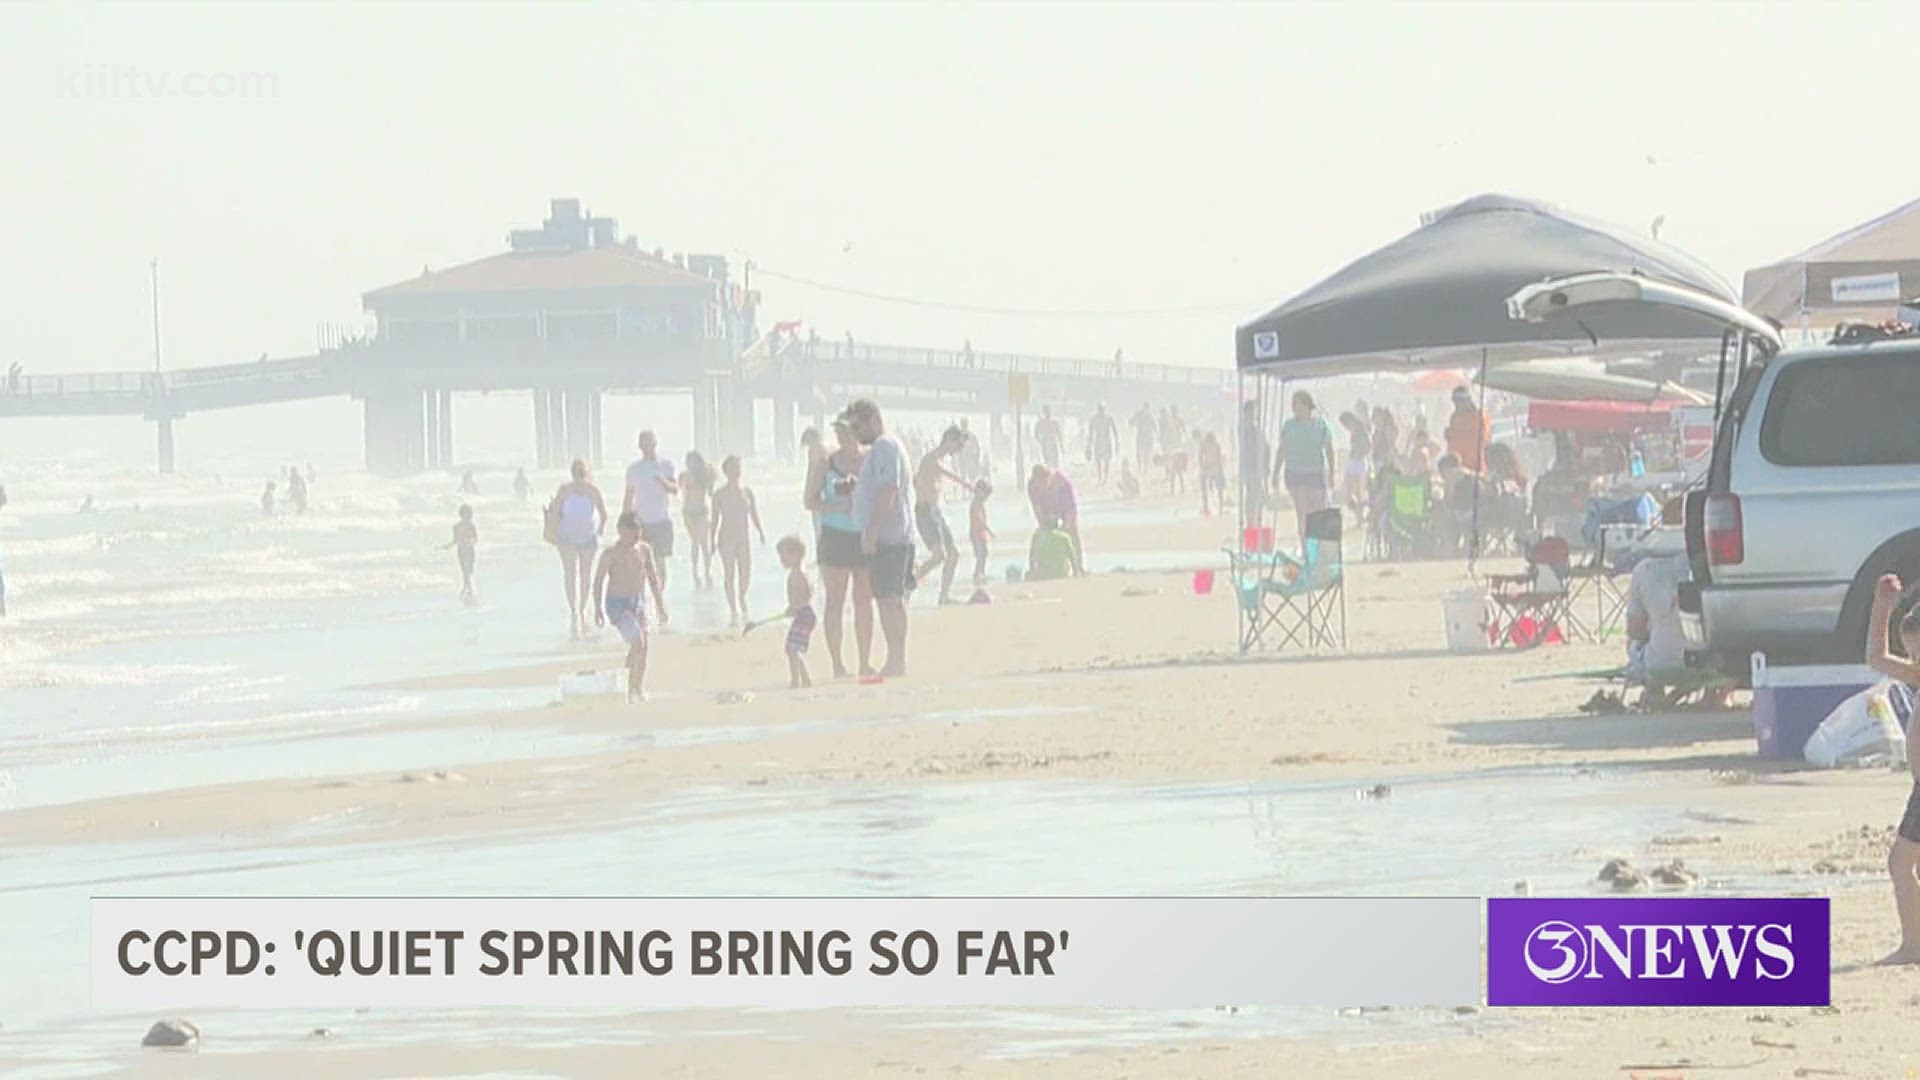 Spring Break 2021 is underway and the Corpus Christi Police Department says it's been quiet so far.